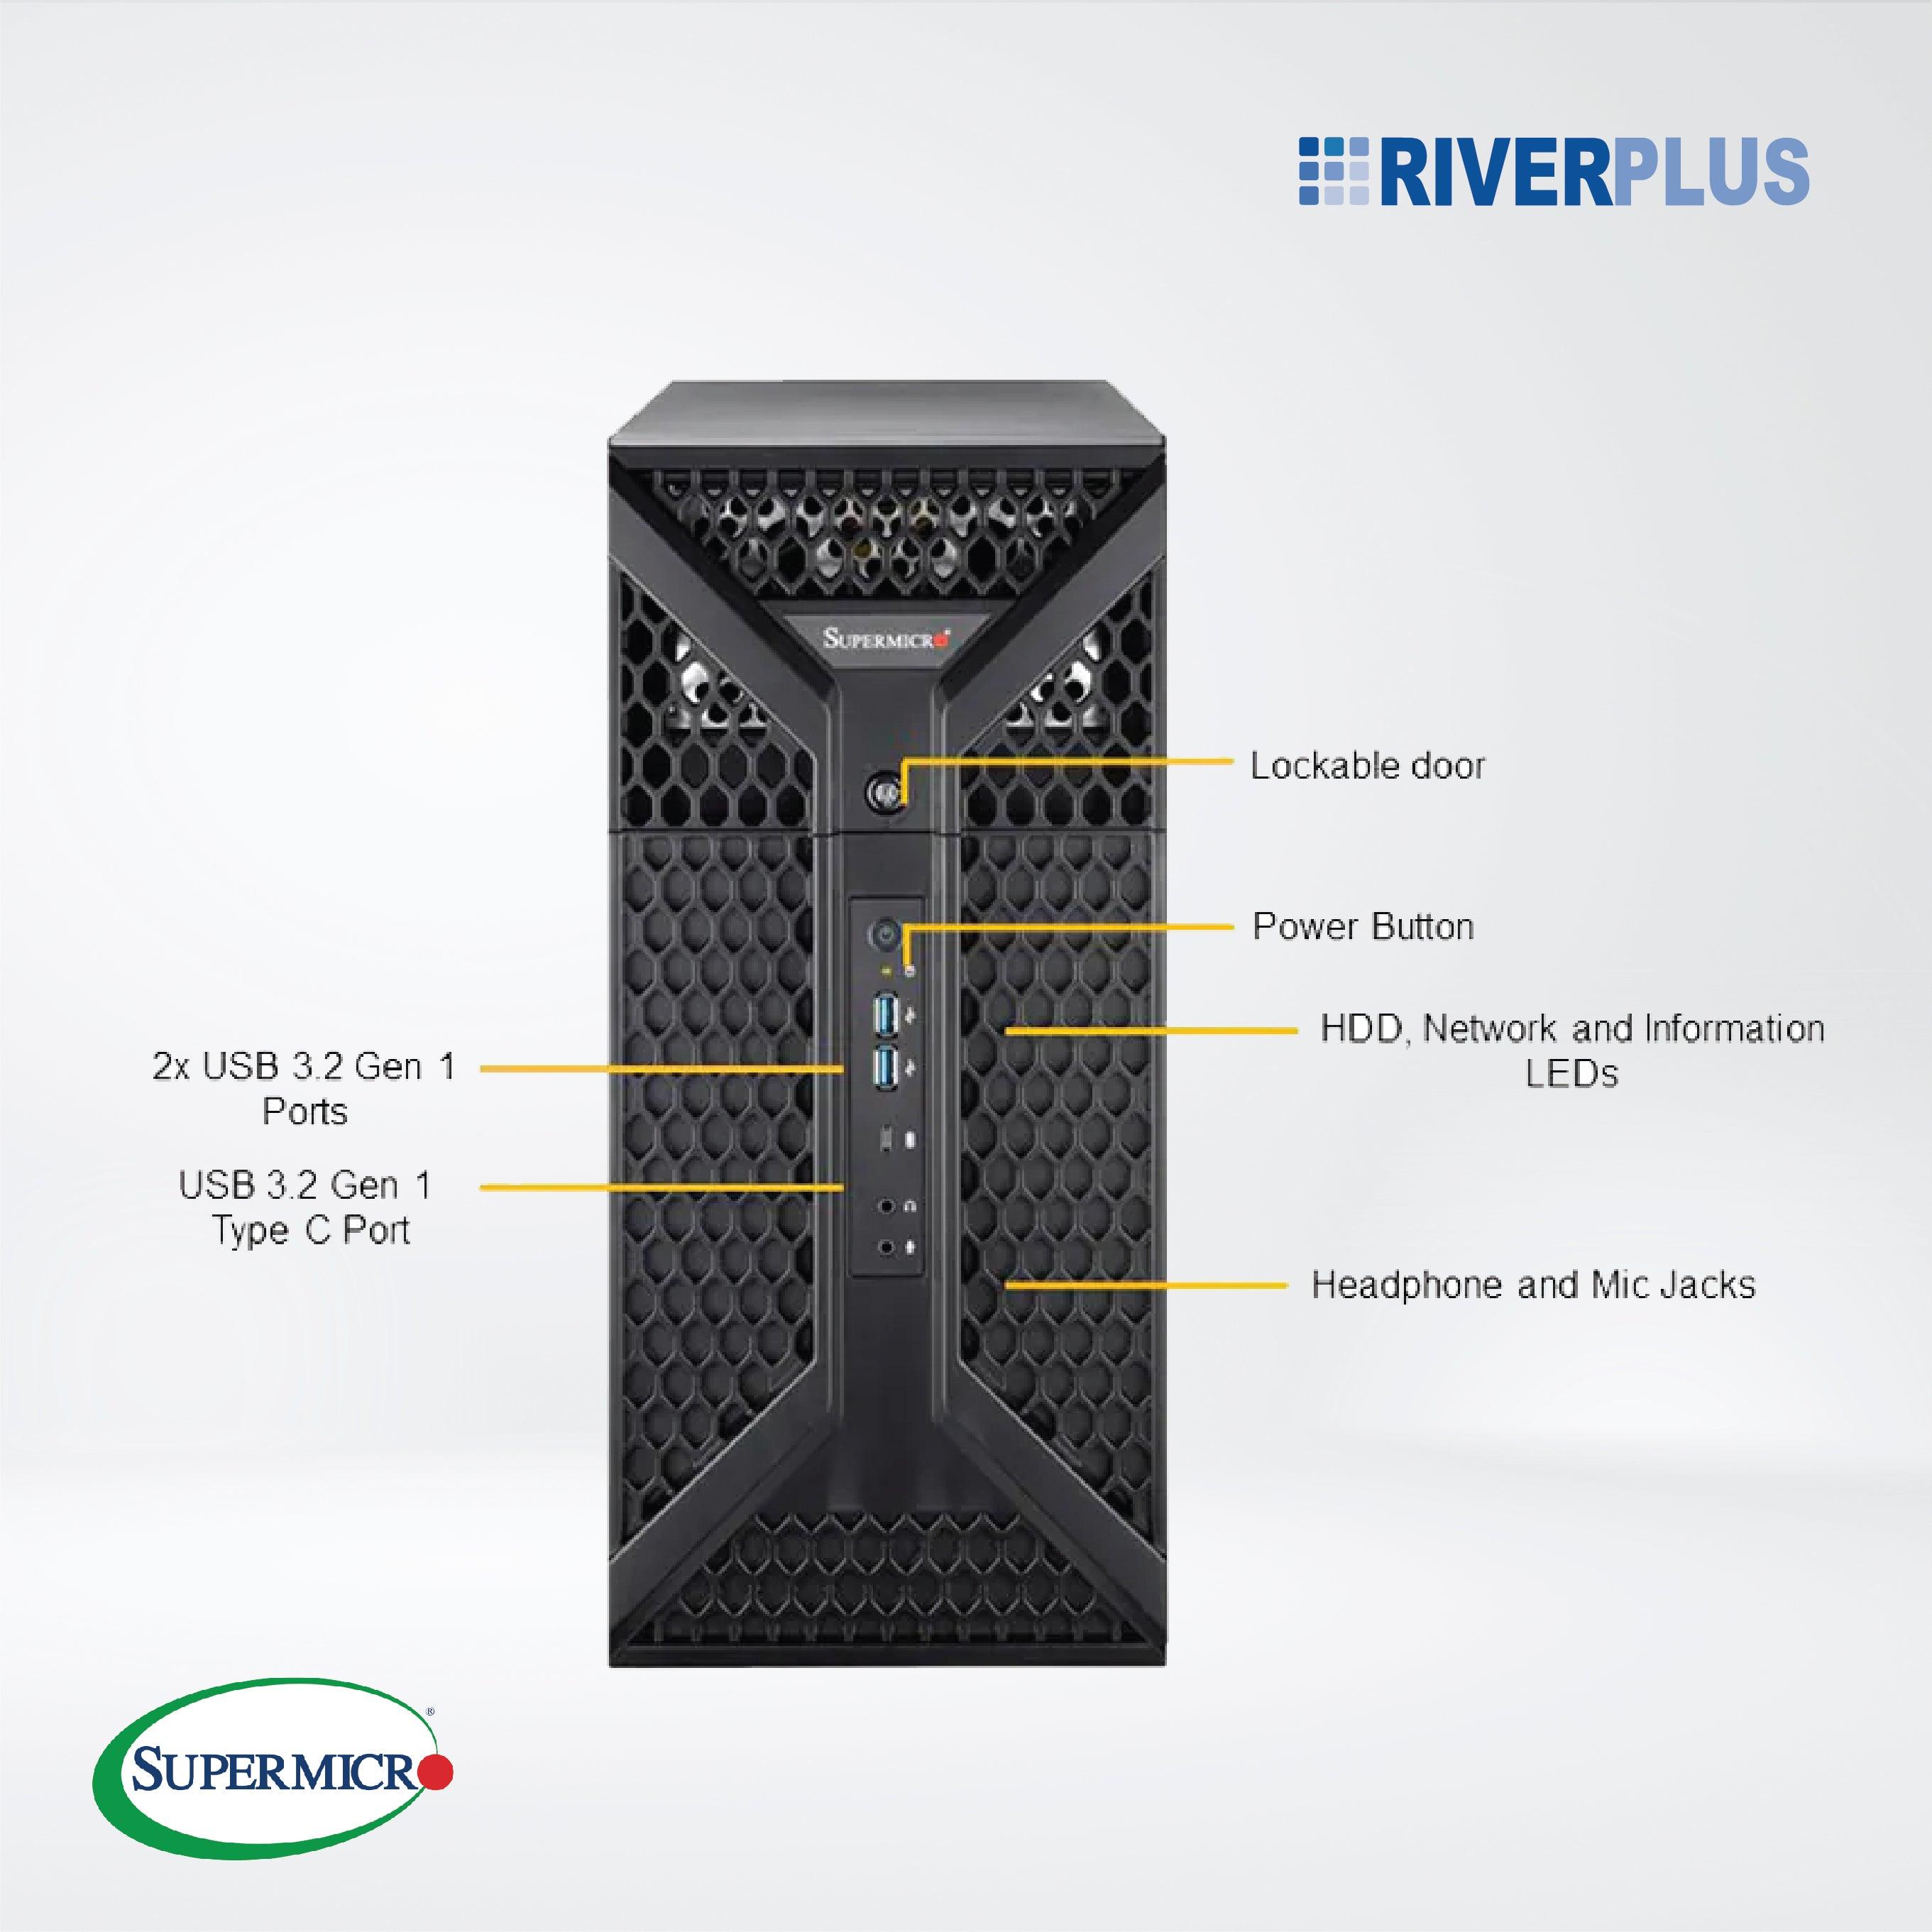 SYS-530A-IL UP Workstation - Riverplus